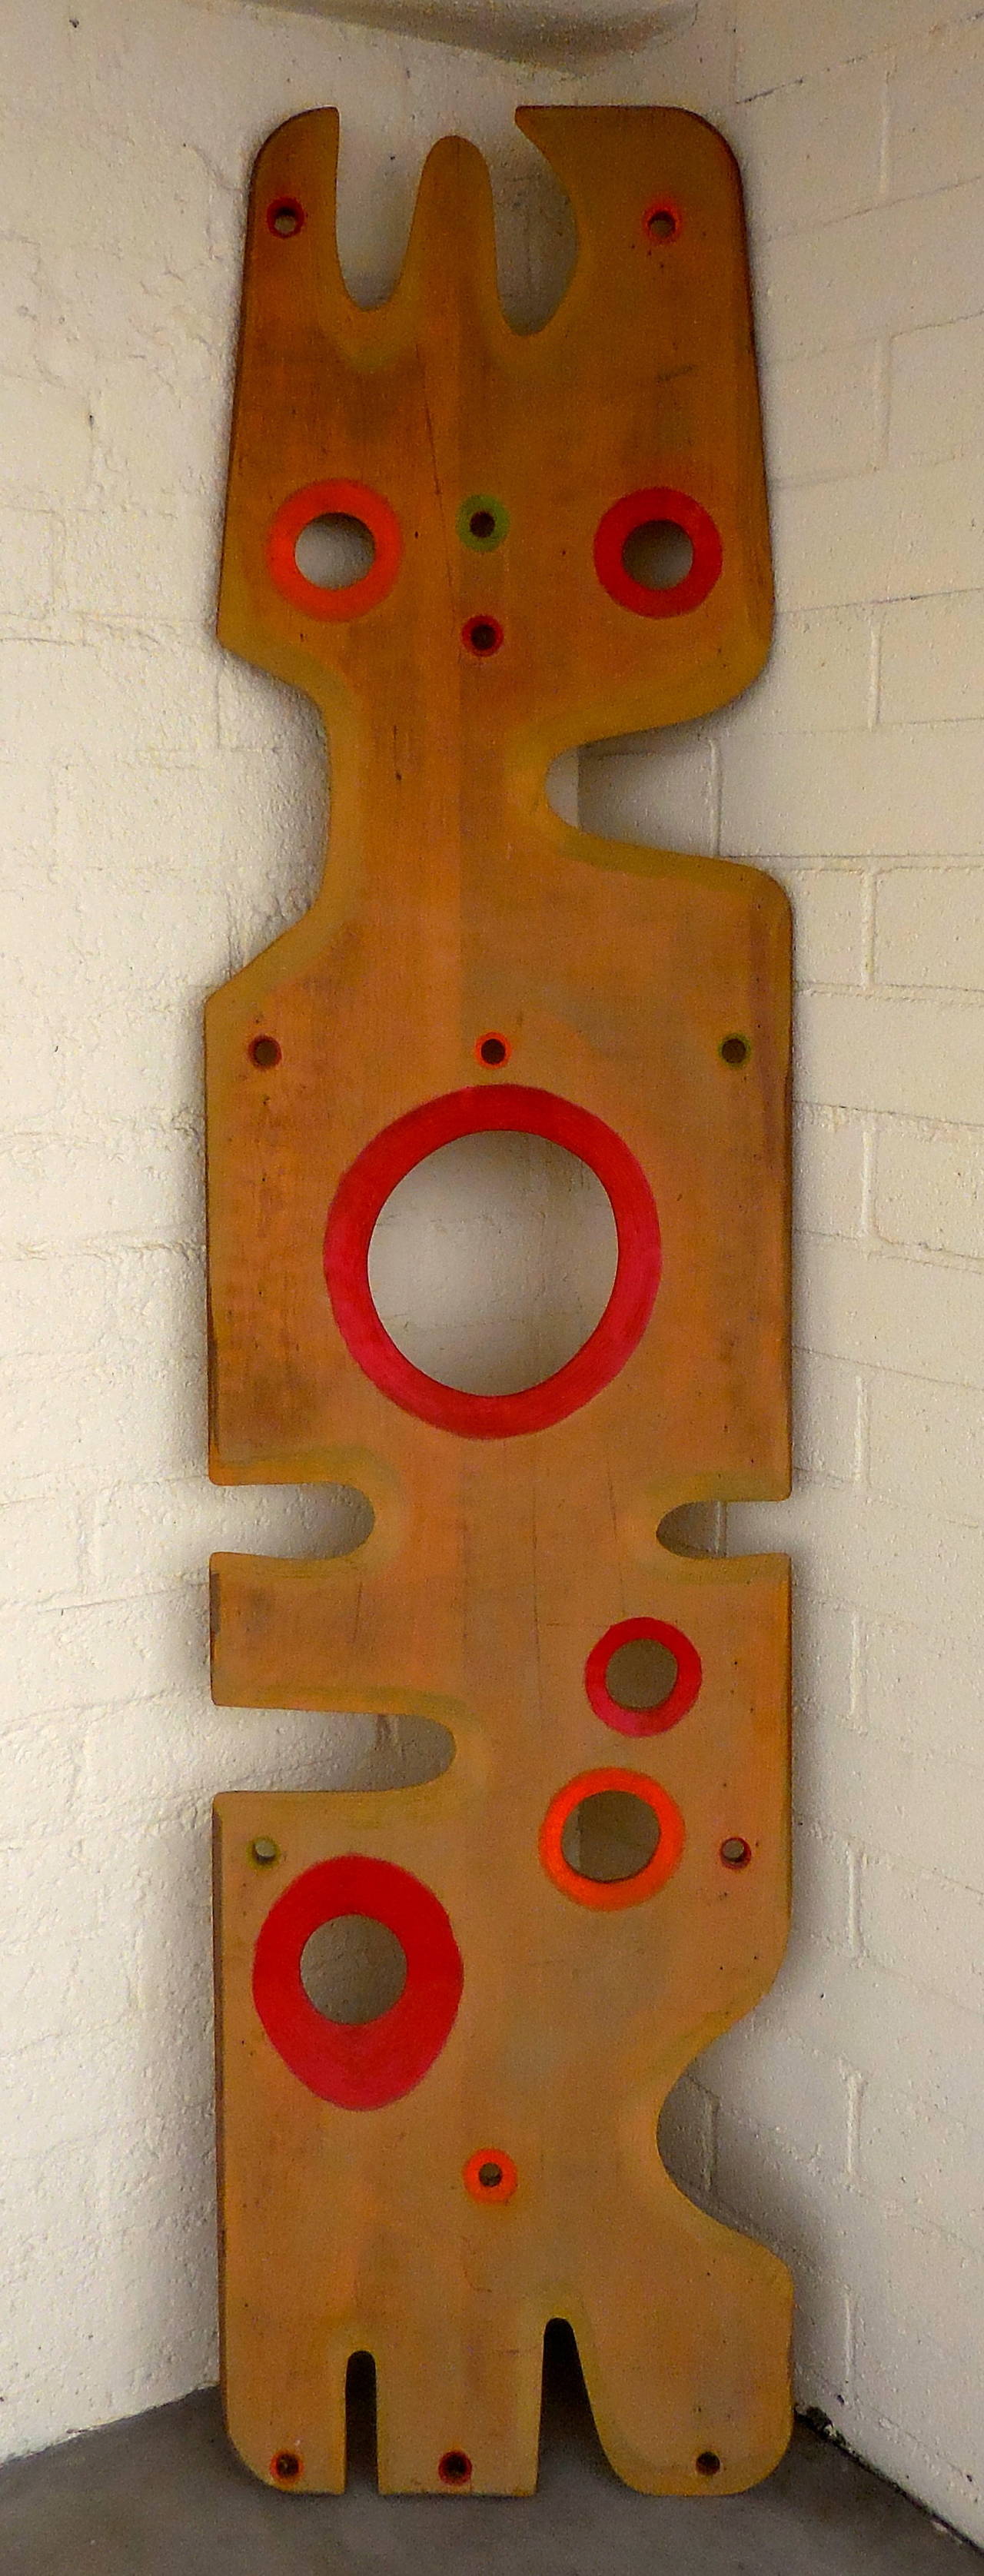 Mid-Century Modern Totemic Mid-20th Century Hand-Carved and Polychromed Wood Sculpture